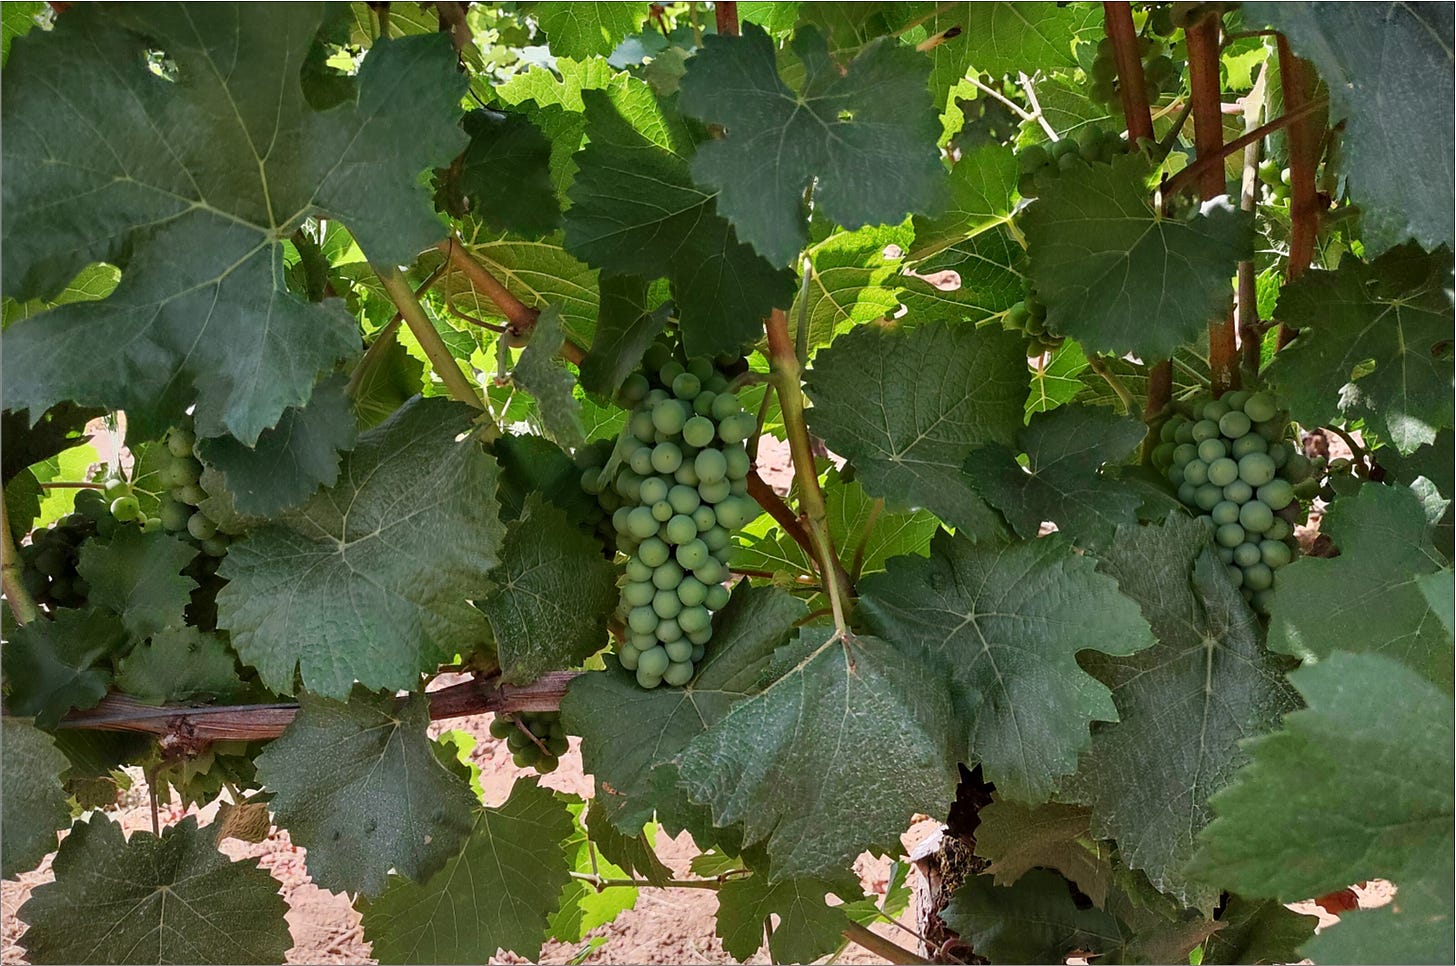 Pommard Clone Pinot Noir clusters with partial shade.